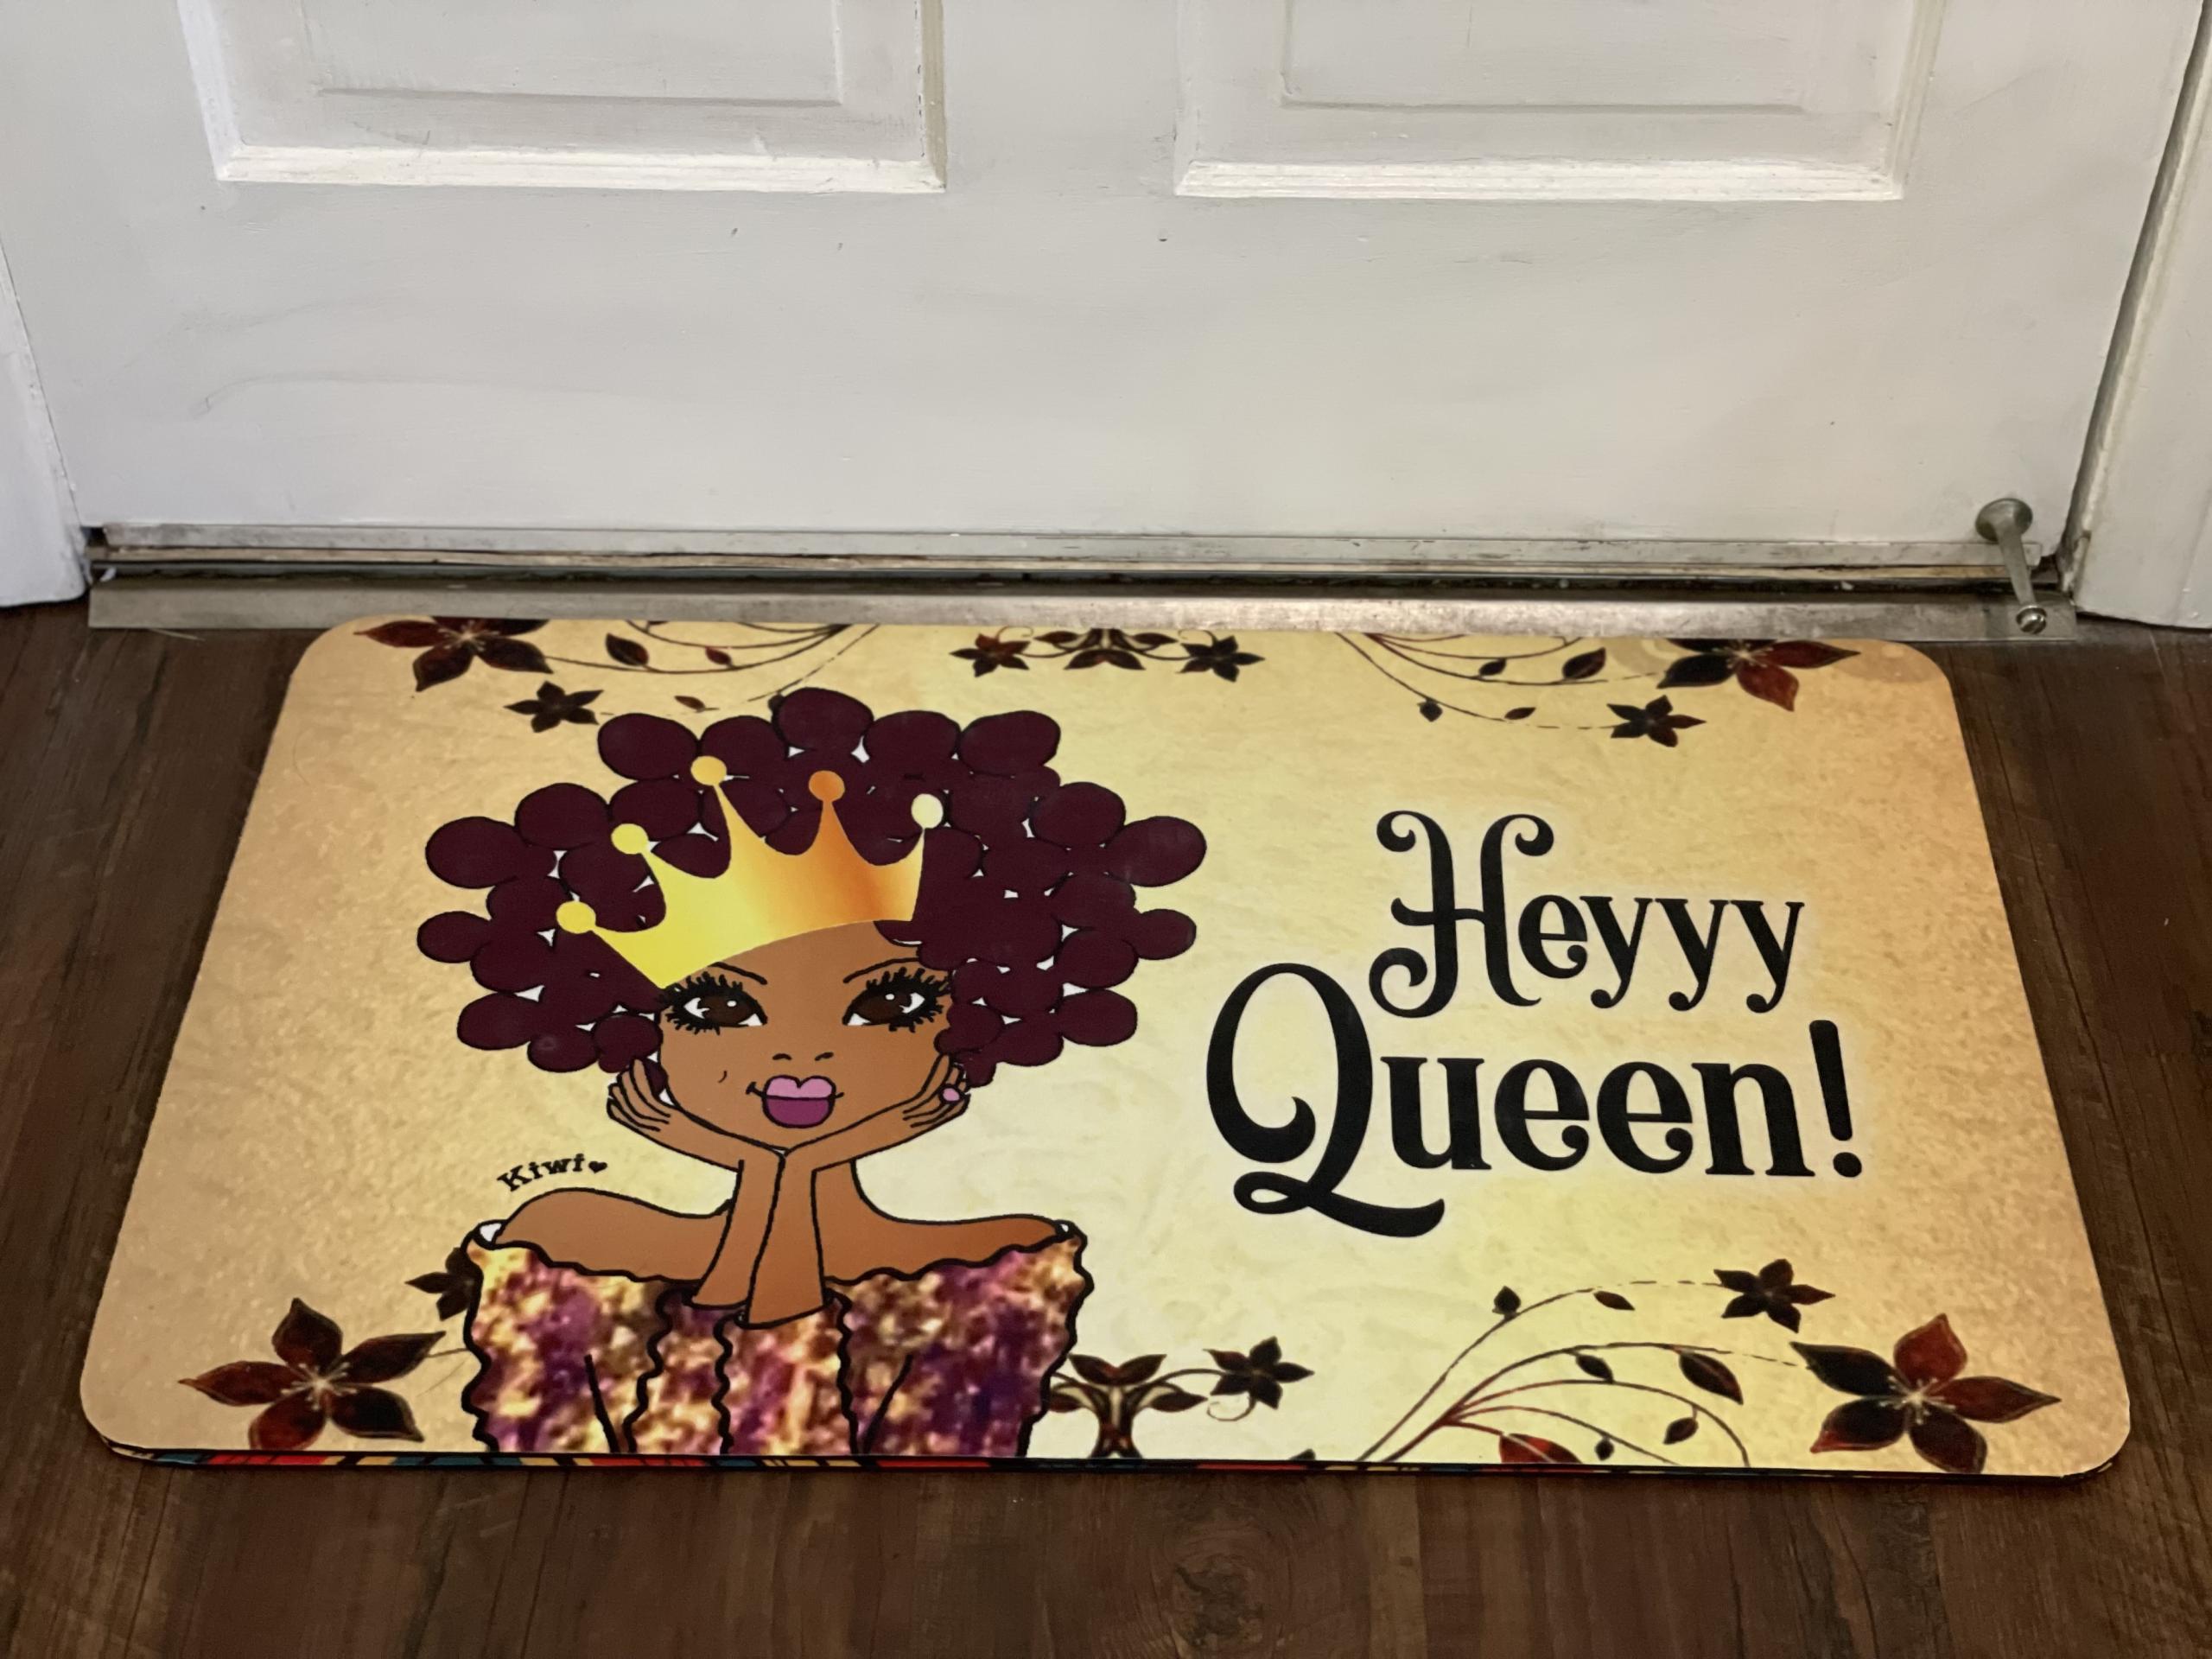 The Kitchen Queen Oven Mitt Potholder Set by Shades of Color